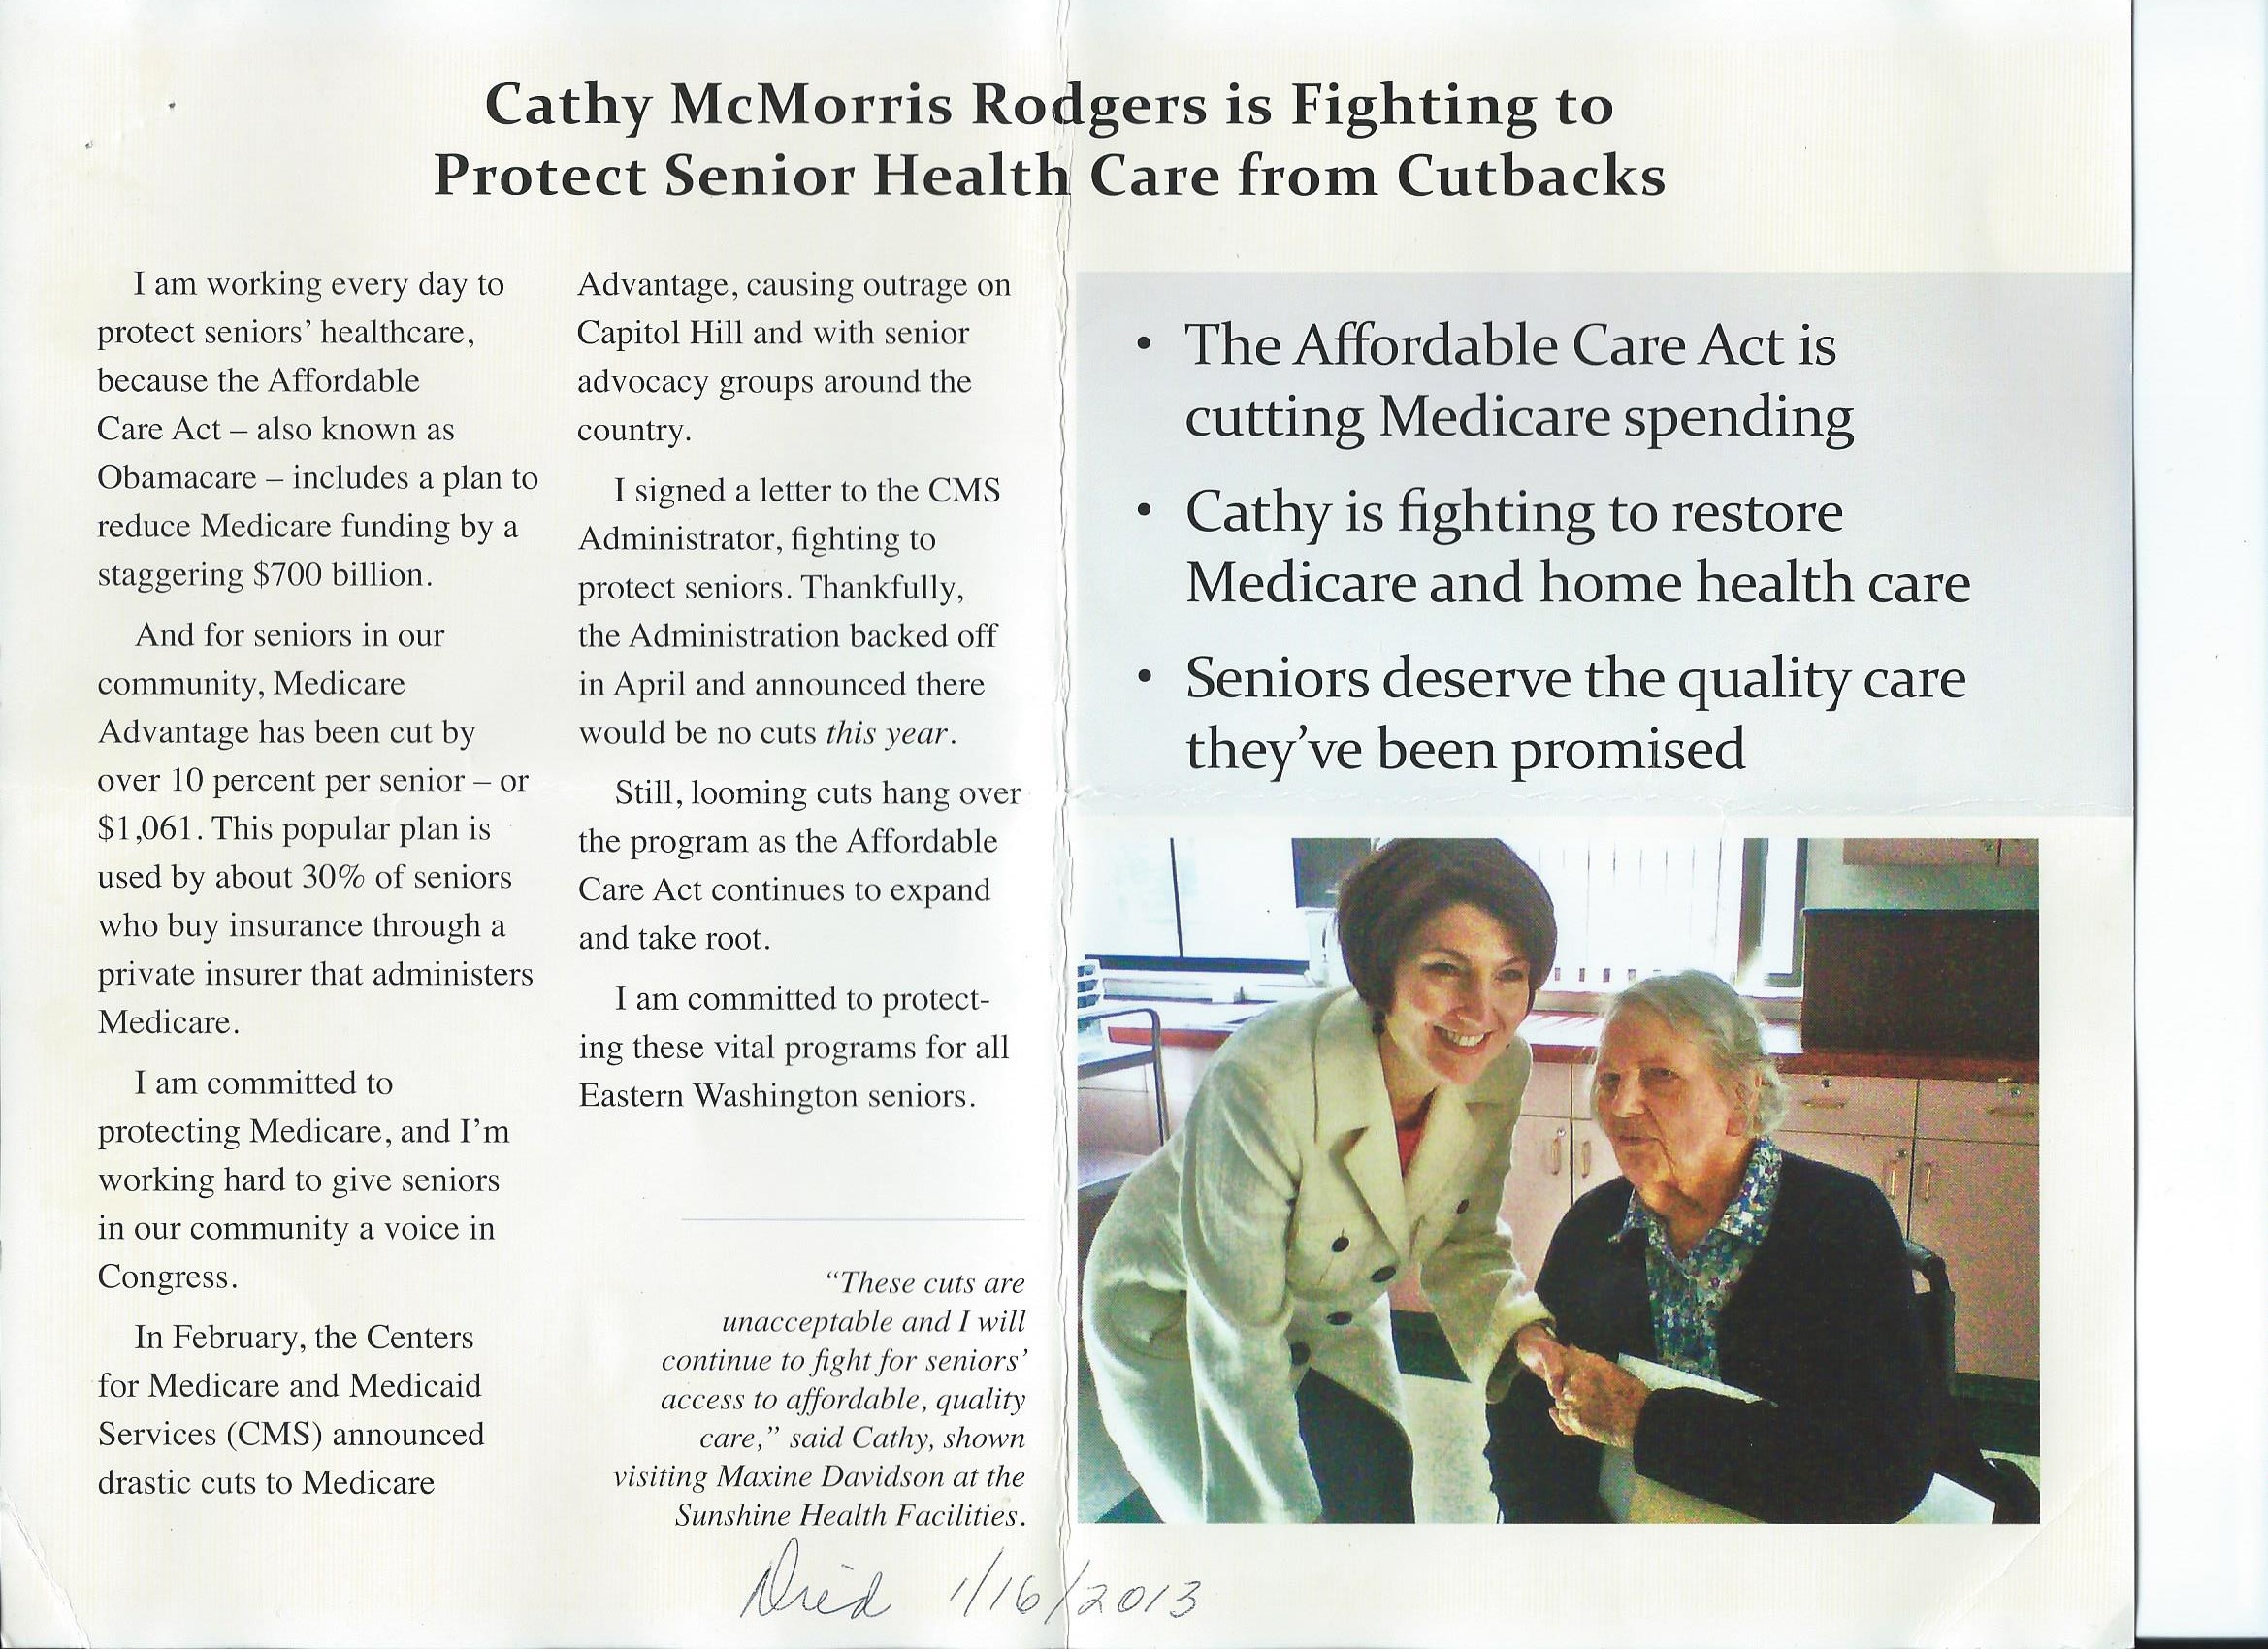 Maxine Davidson shakes Cathy McMorris Rodgers' hand in a picture on a mailer sent out this month.